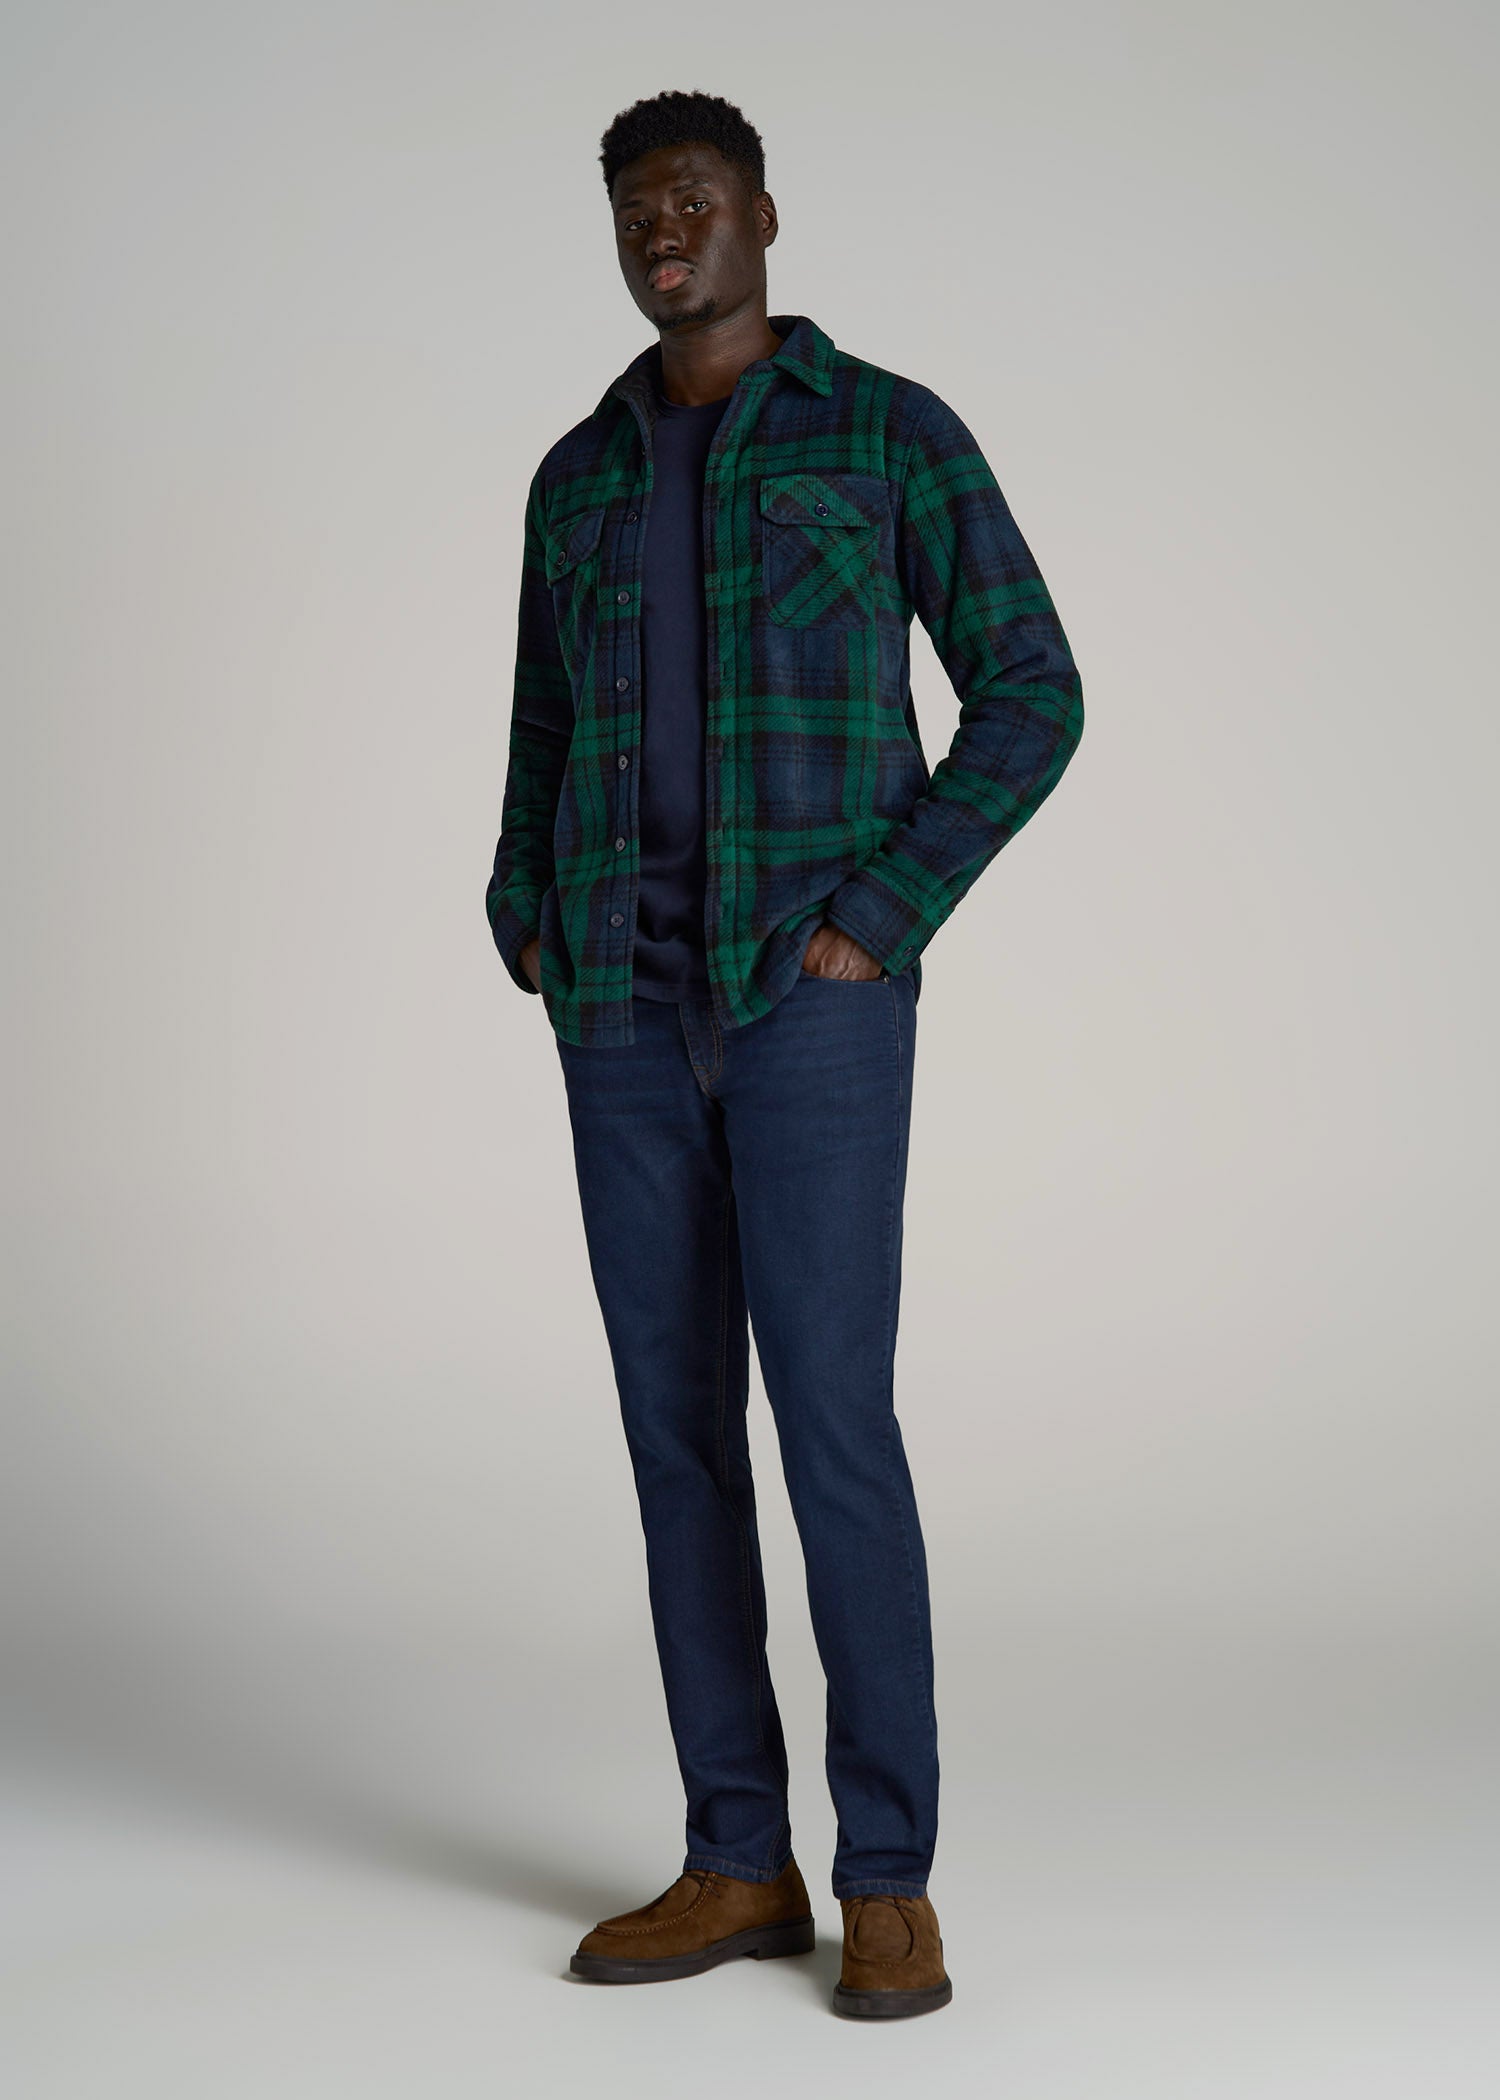 Sherpa-Lined Fleece Overshirt for Tall Men in Dark Blue & Green Plaid S / Tall / Dark Blue & Green Plaid